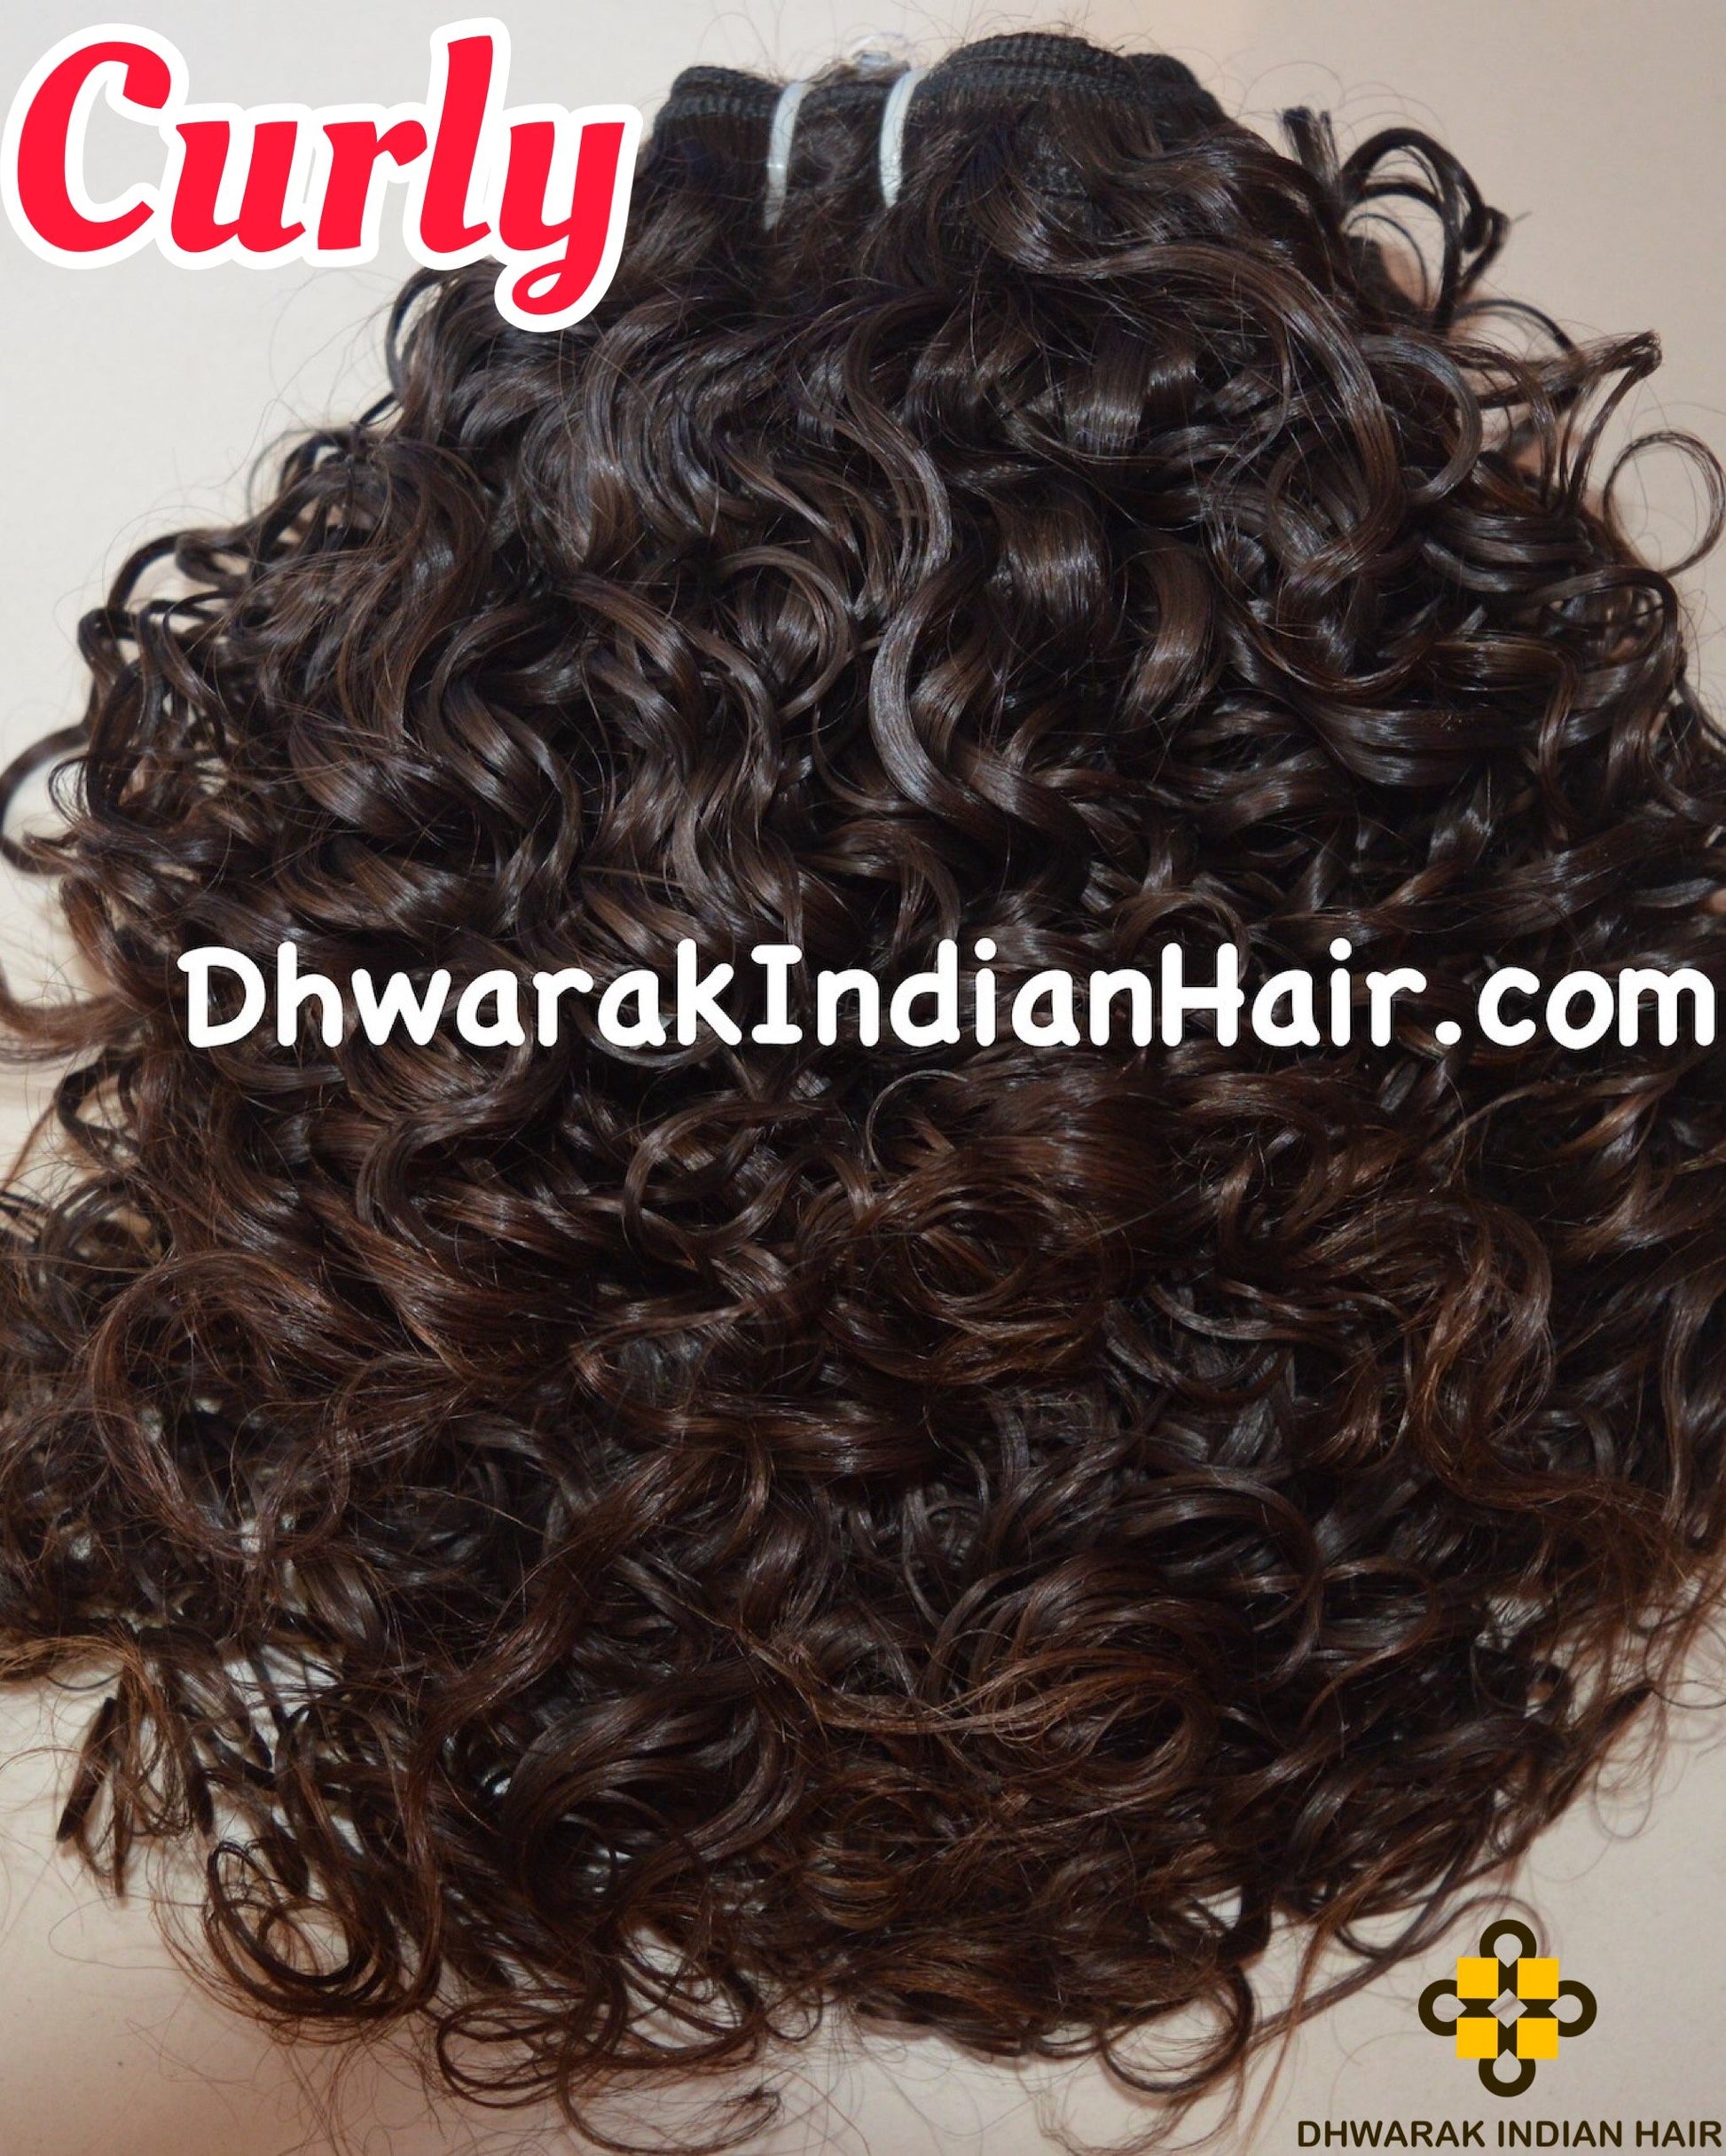 Raw Indian curly hair vendors